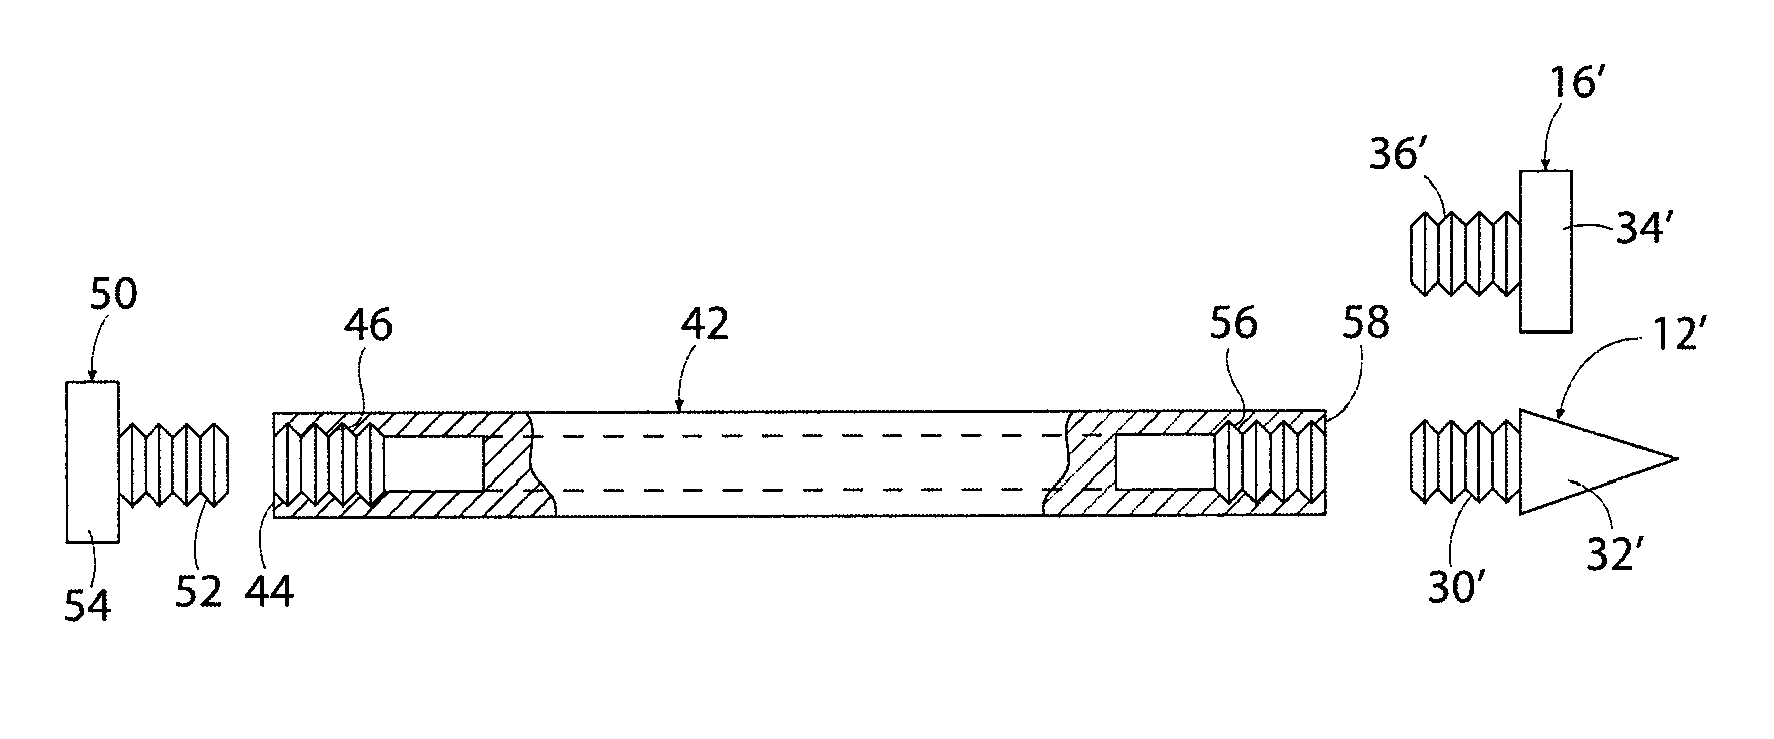 Bone bolt assembly for attaching supporting implants to bones, for holding multiple bones in relative positions, and for holding together fractured bone fragments